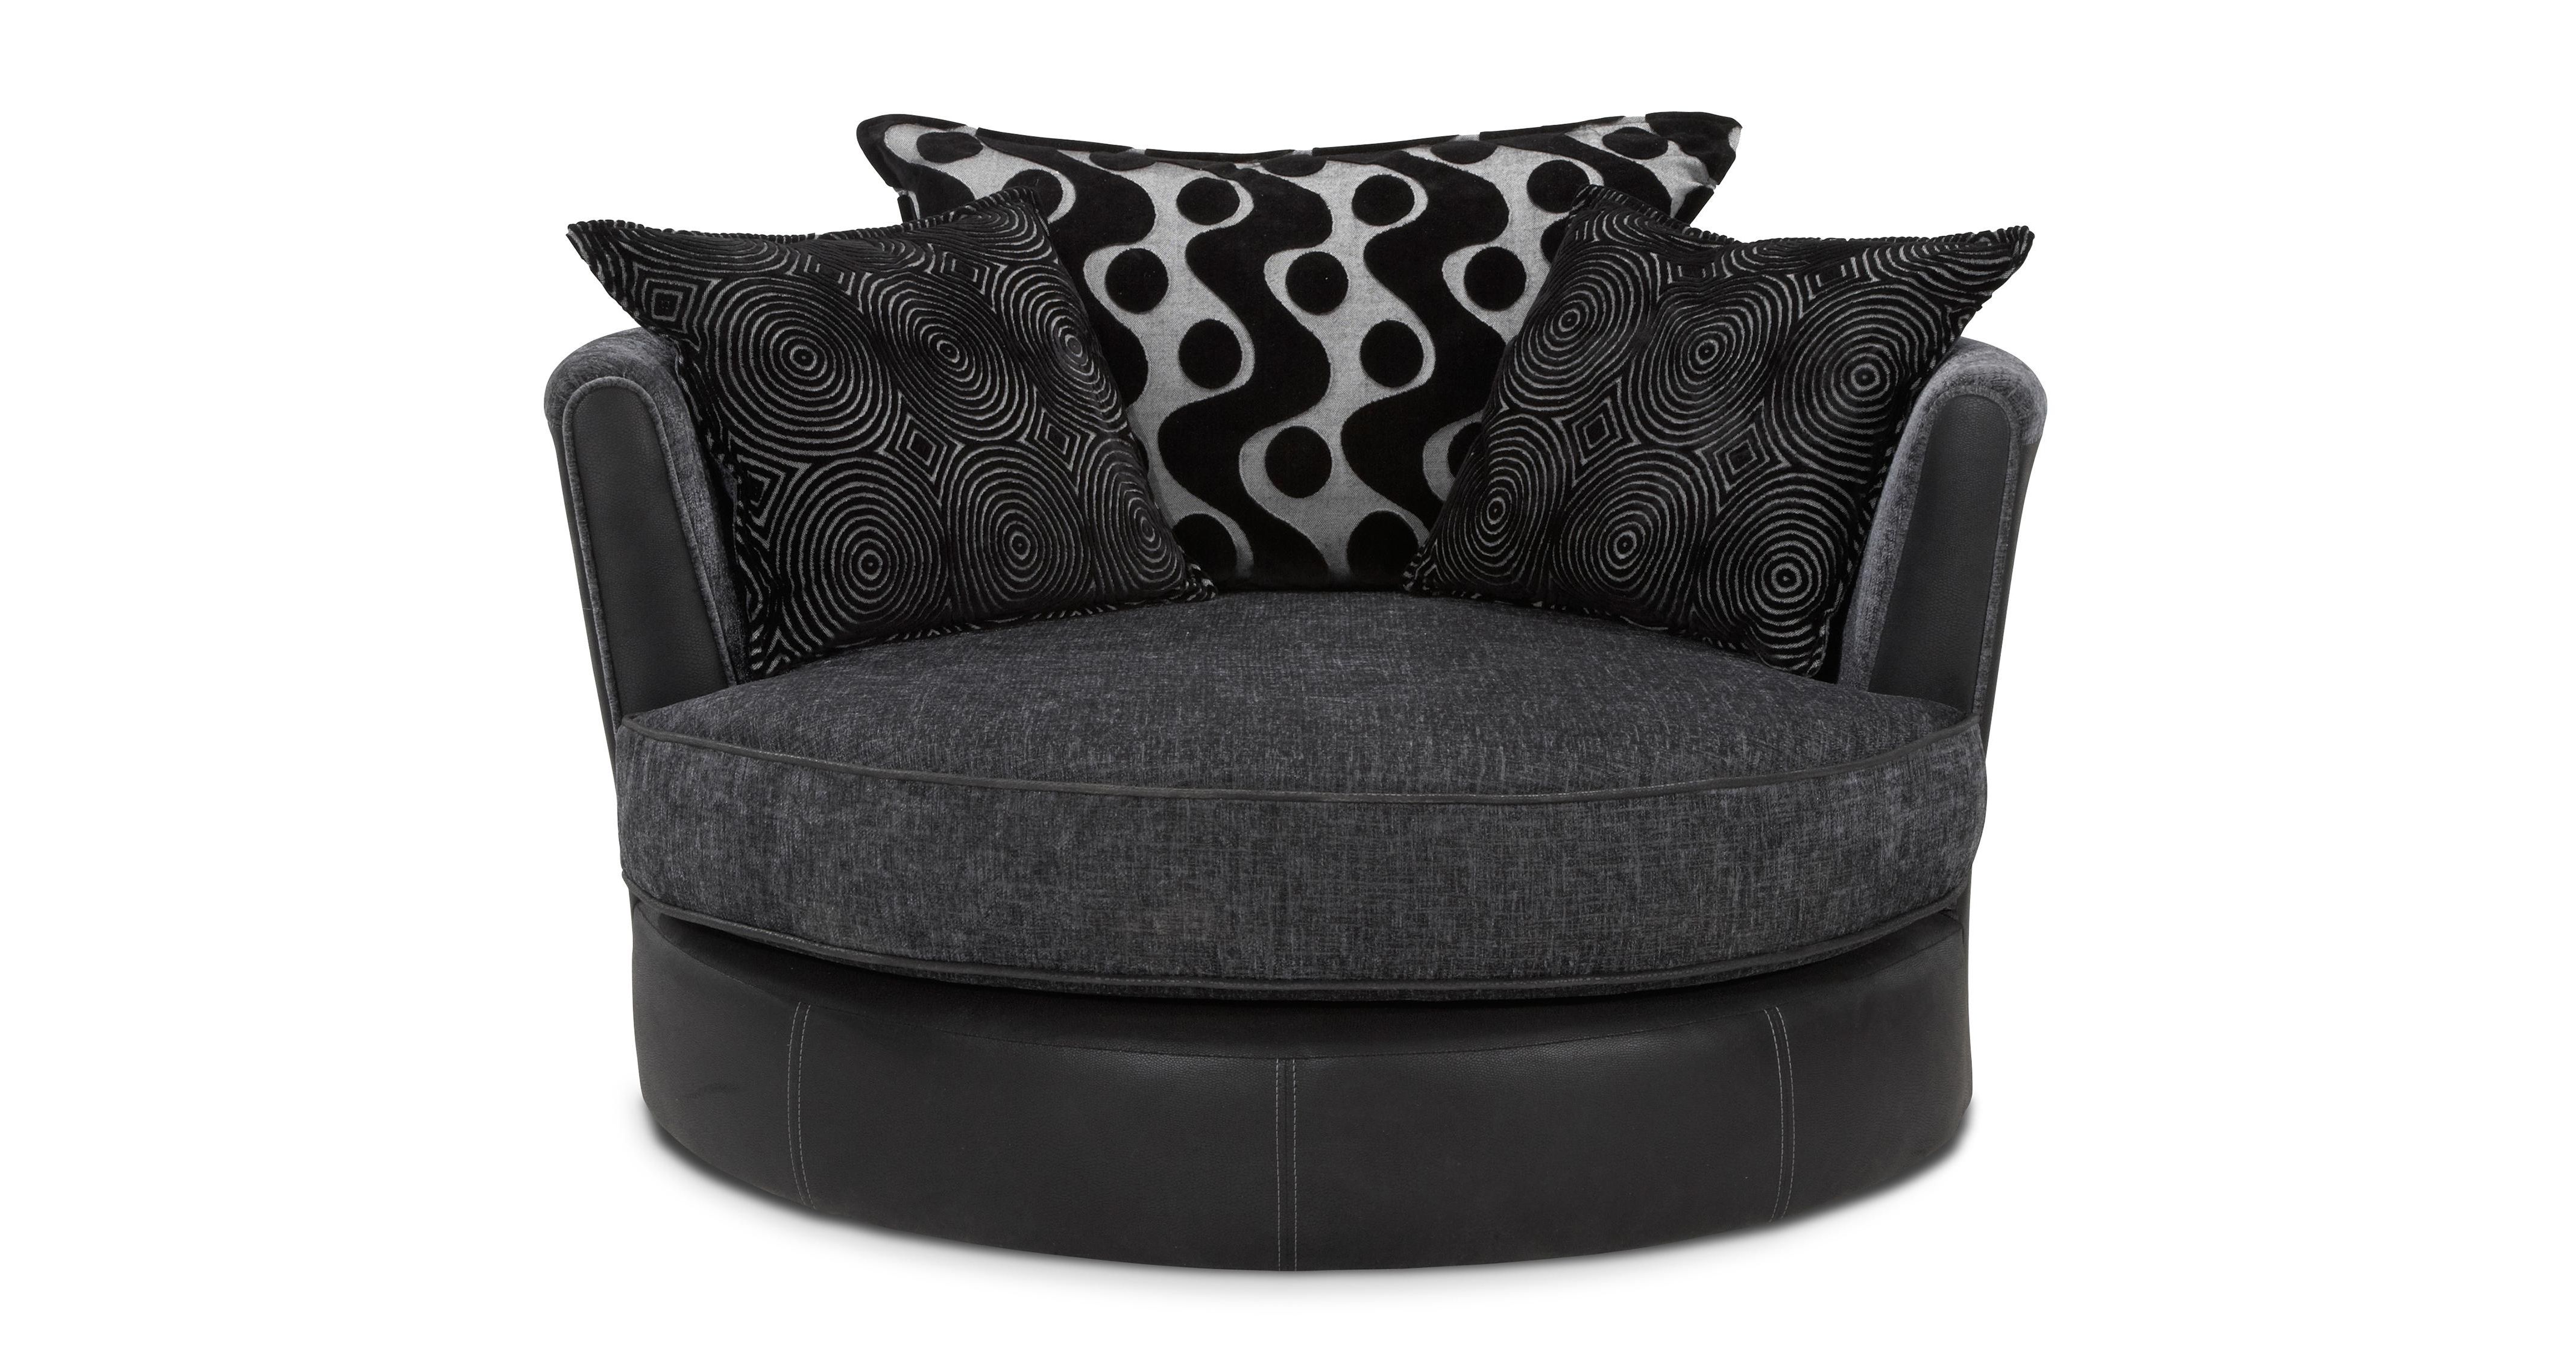 Preferred Round Swivel Sofa Chairs In Furniture: Mesmerizing Cuddle Chair From Walmart And For Your (View 13 of 20)